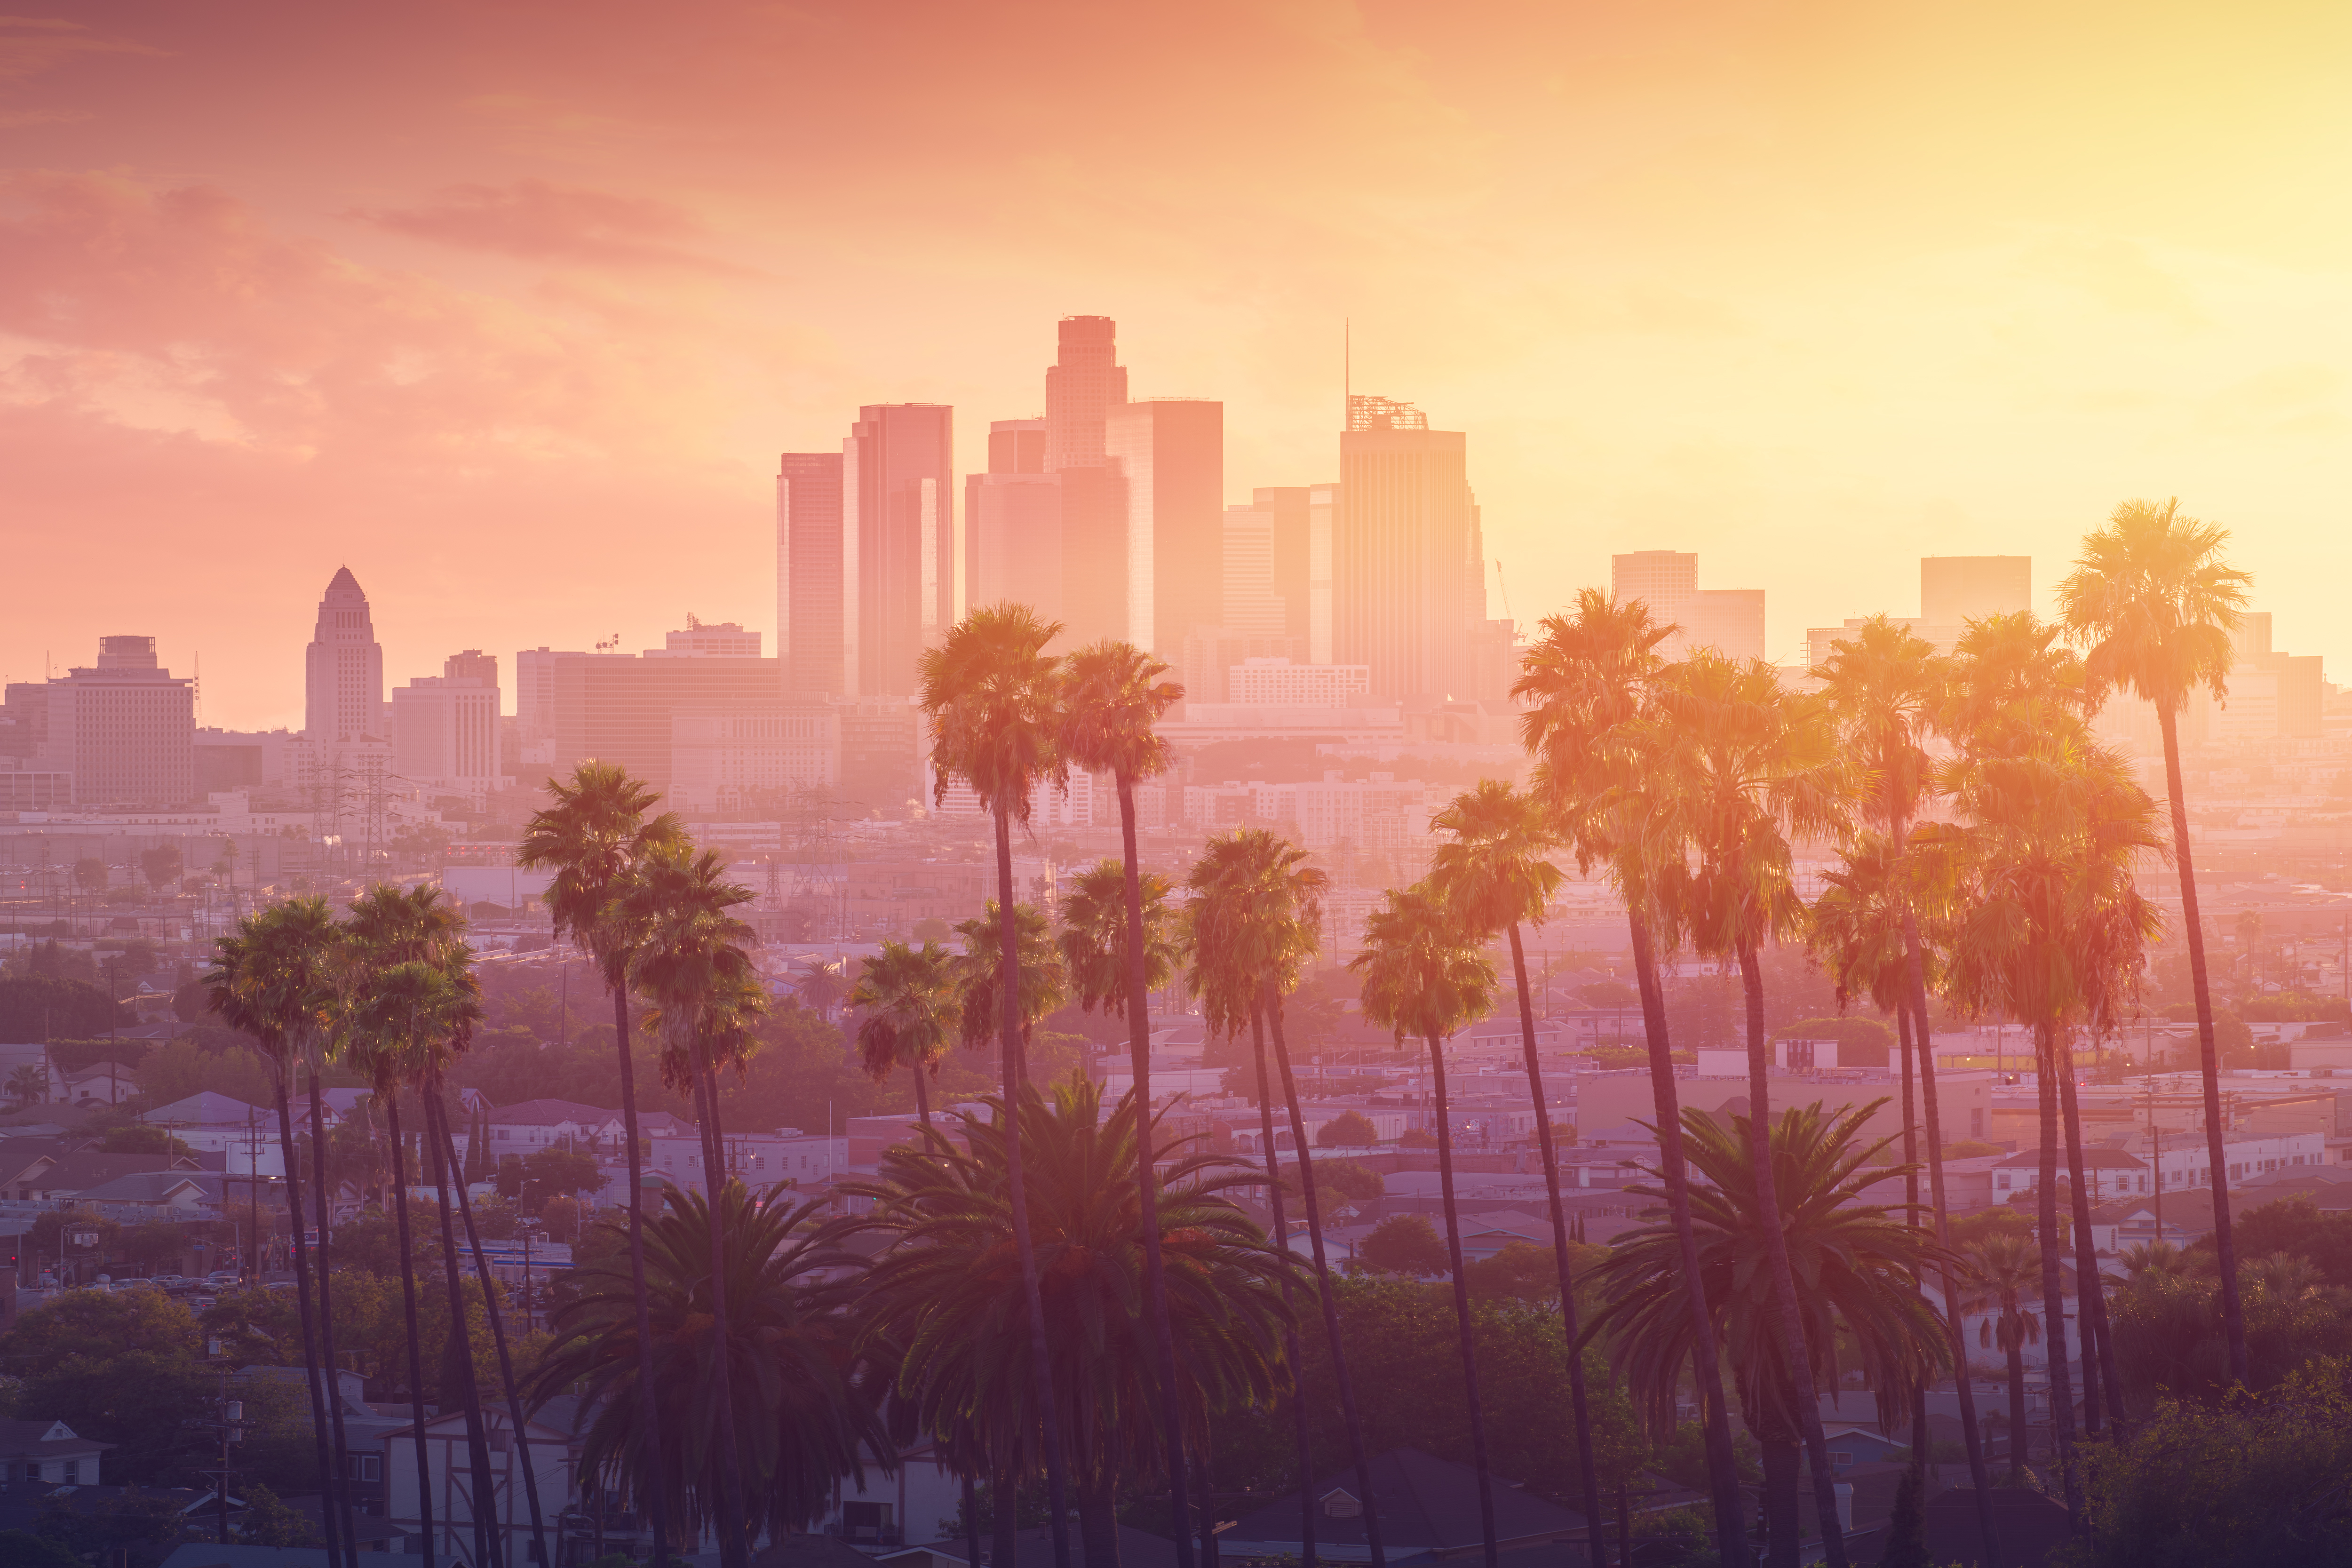 A distant view of the Los Angeles skyline, fronted by a row of palm trees. Sunset casts a gradient of yellow, pink, and purple over the scene. 